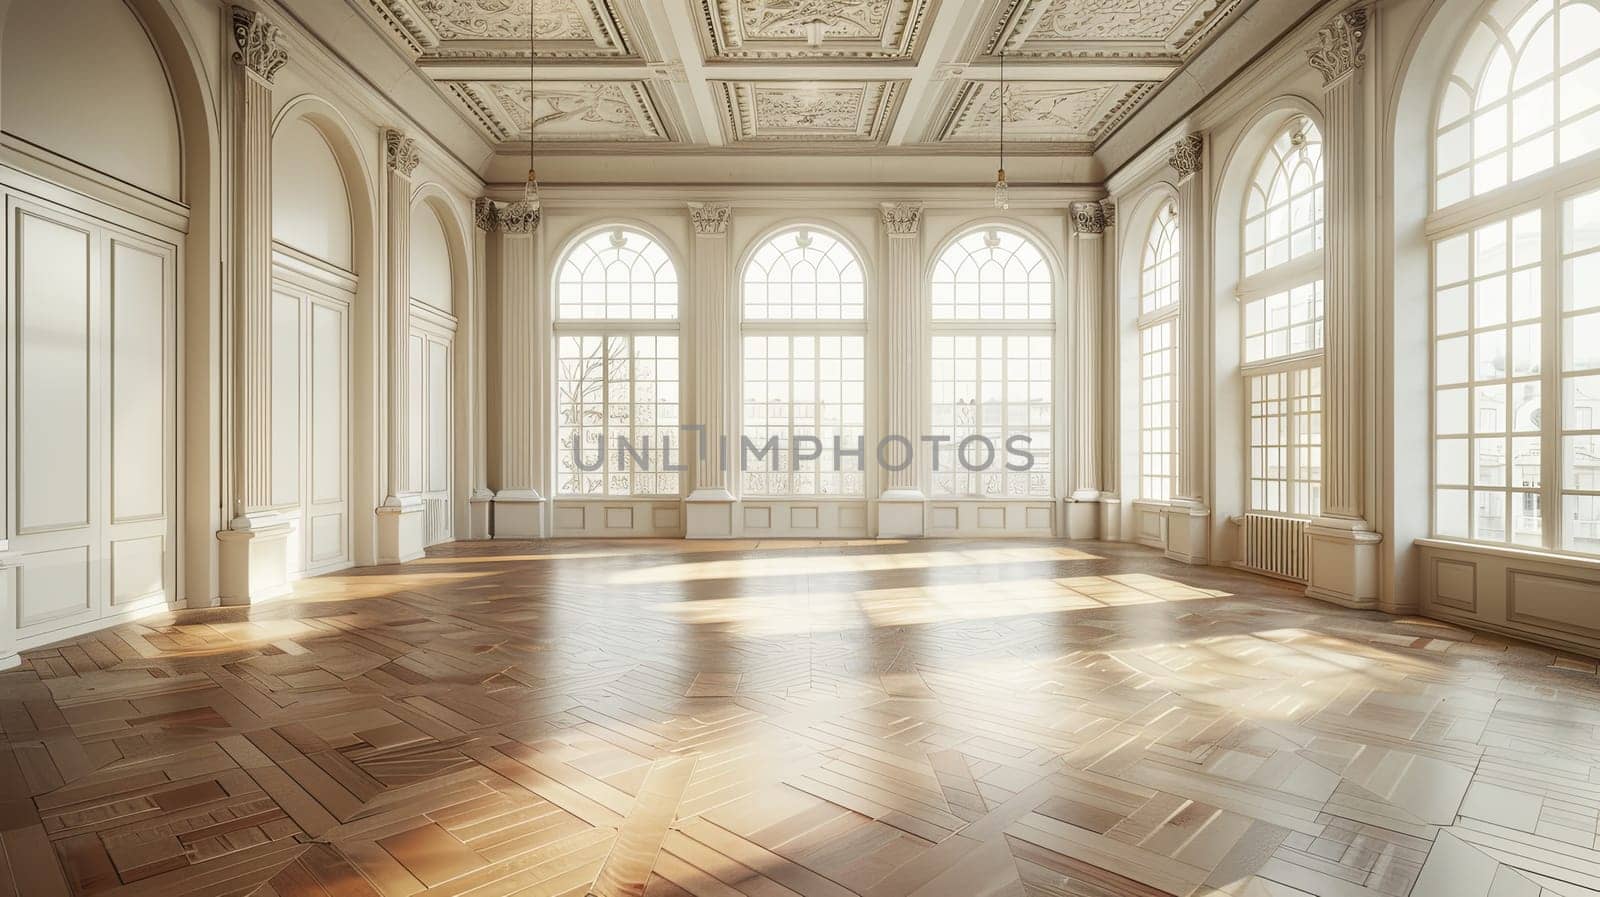 An empty banquet hall with vintage-style wooden floors, light-colored walls, and large windows illuminating the room.